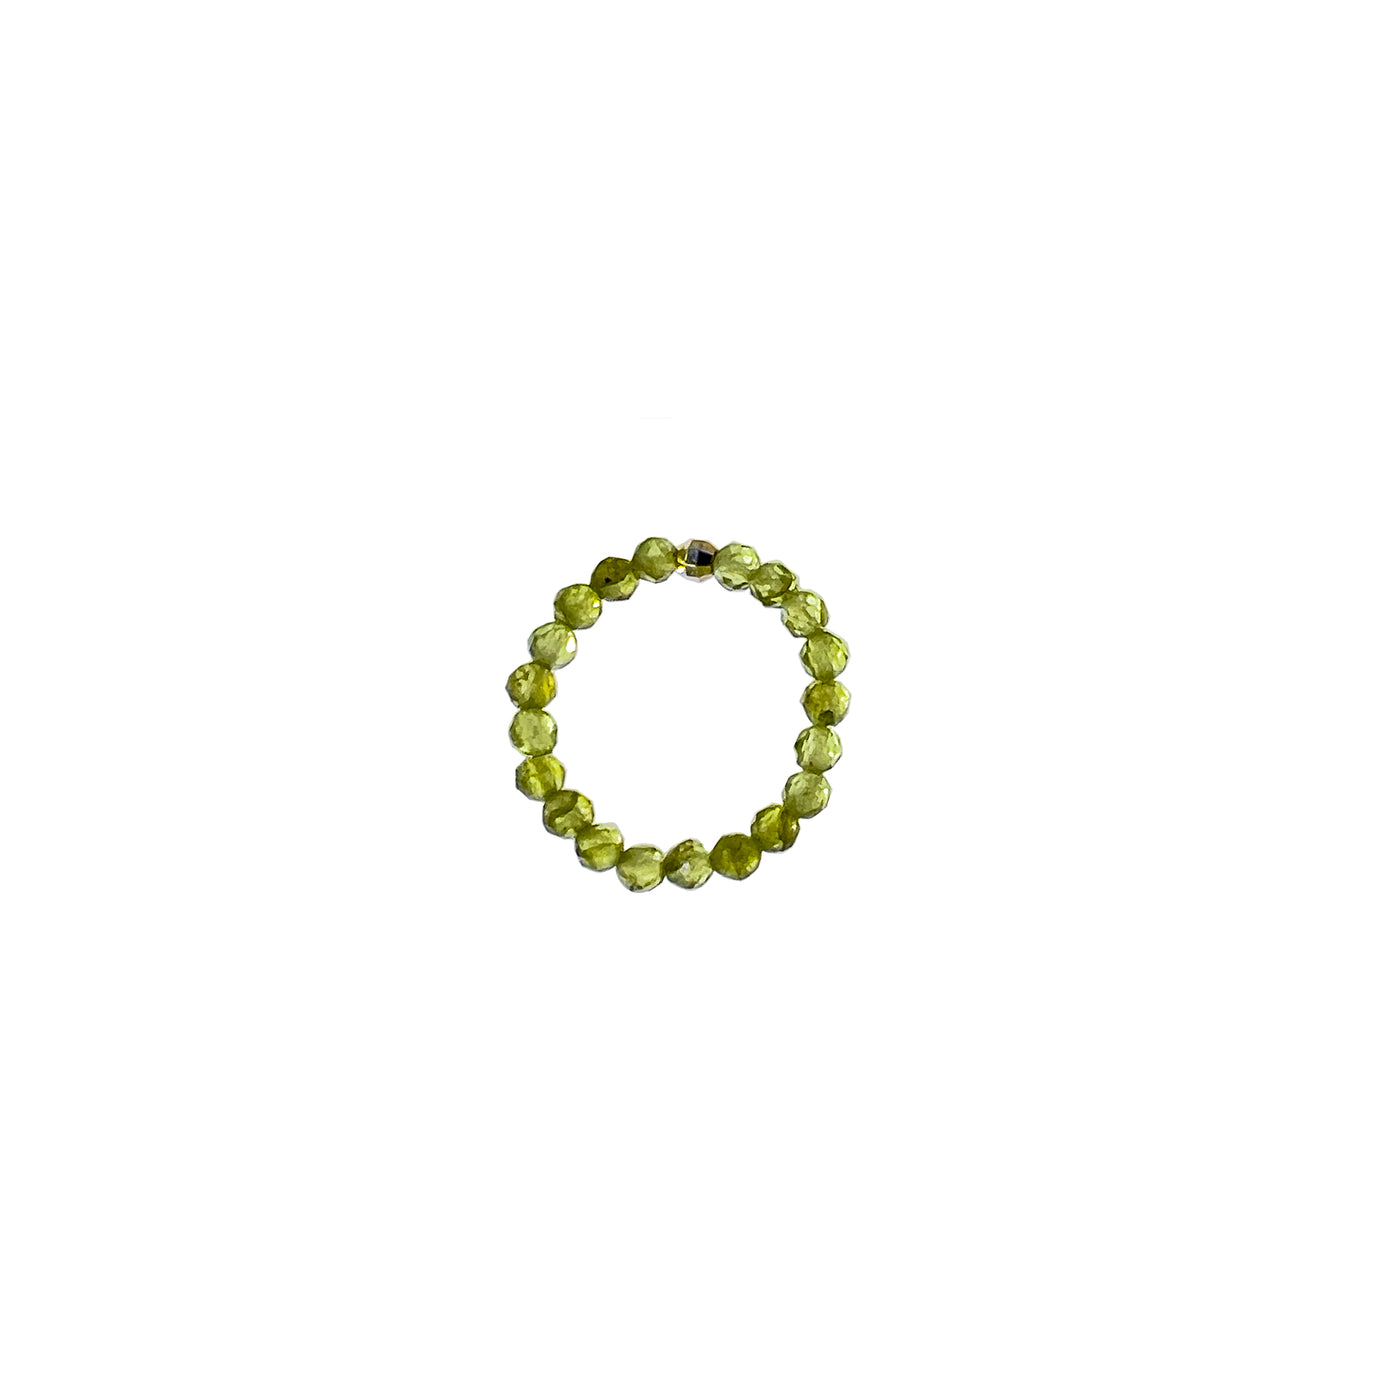 AUGUST Birthstone: Peridot Women's Delicate Faceted Stretch Ring